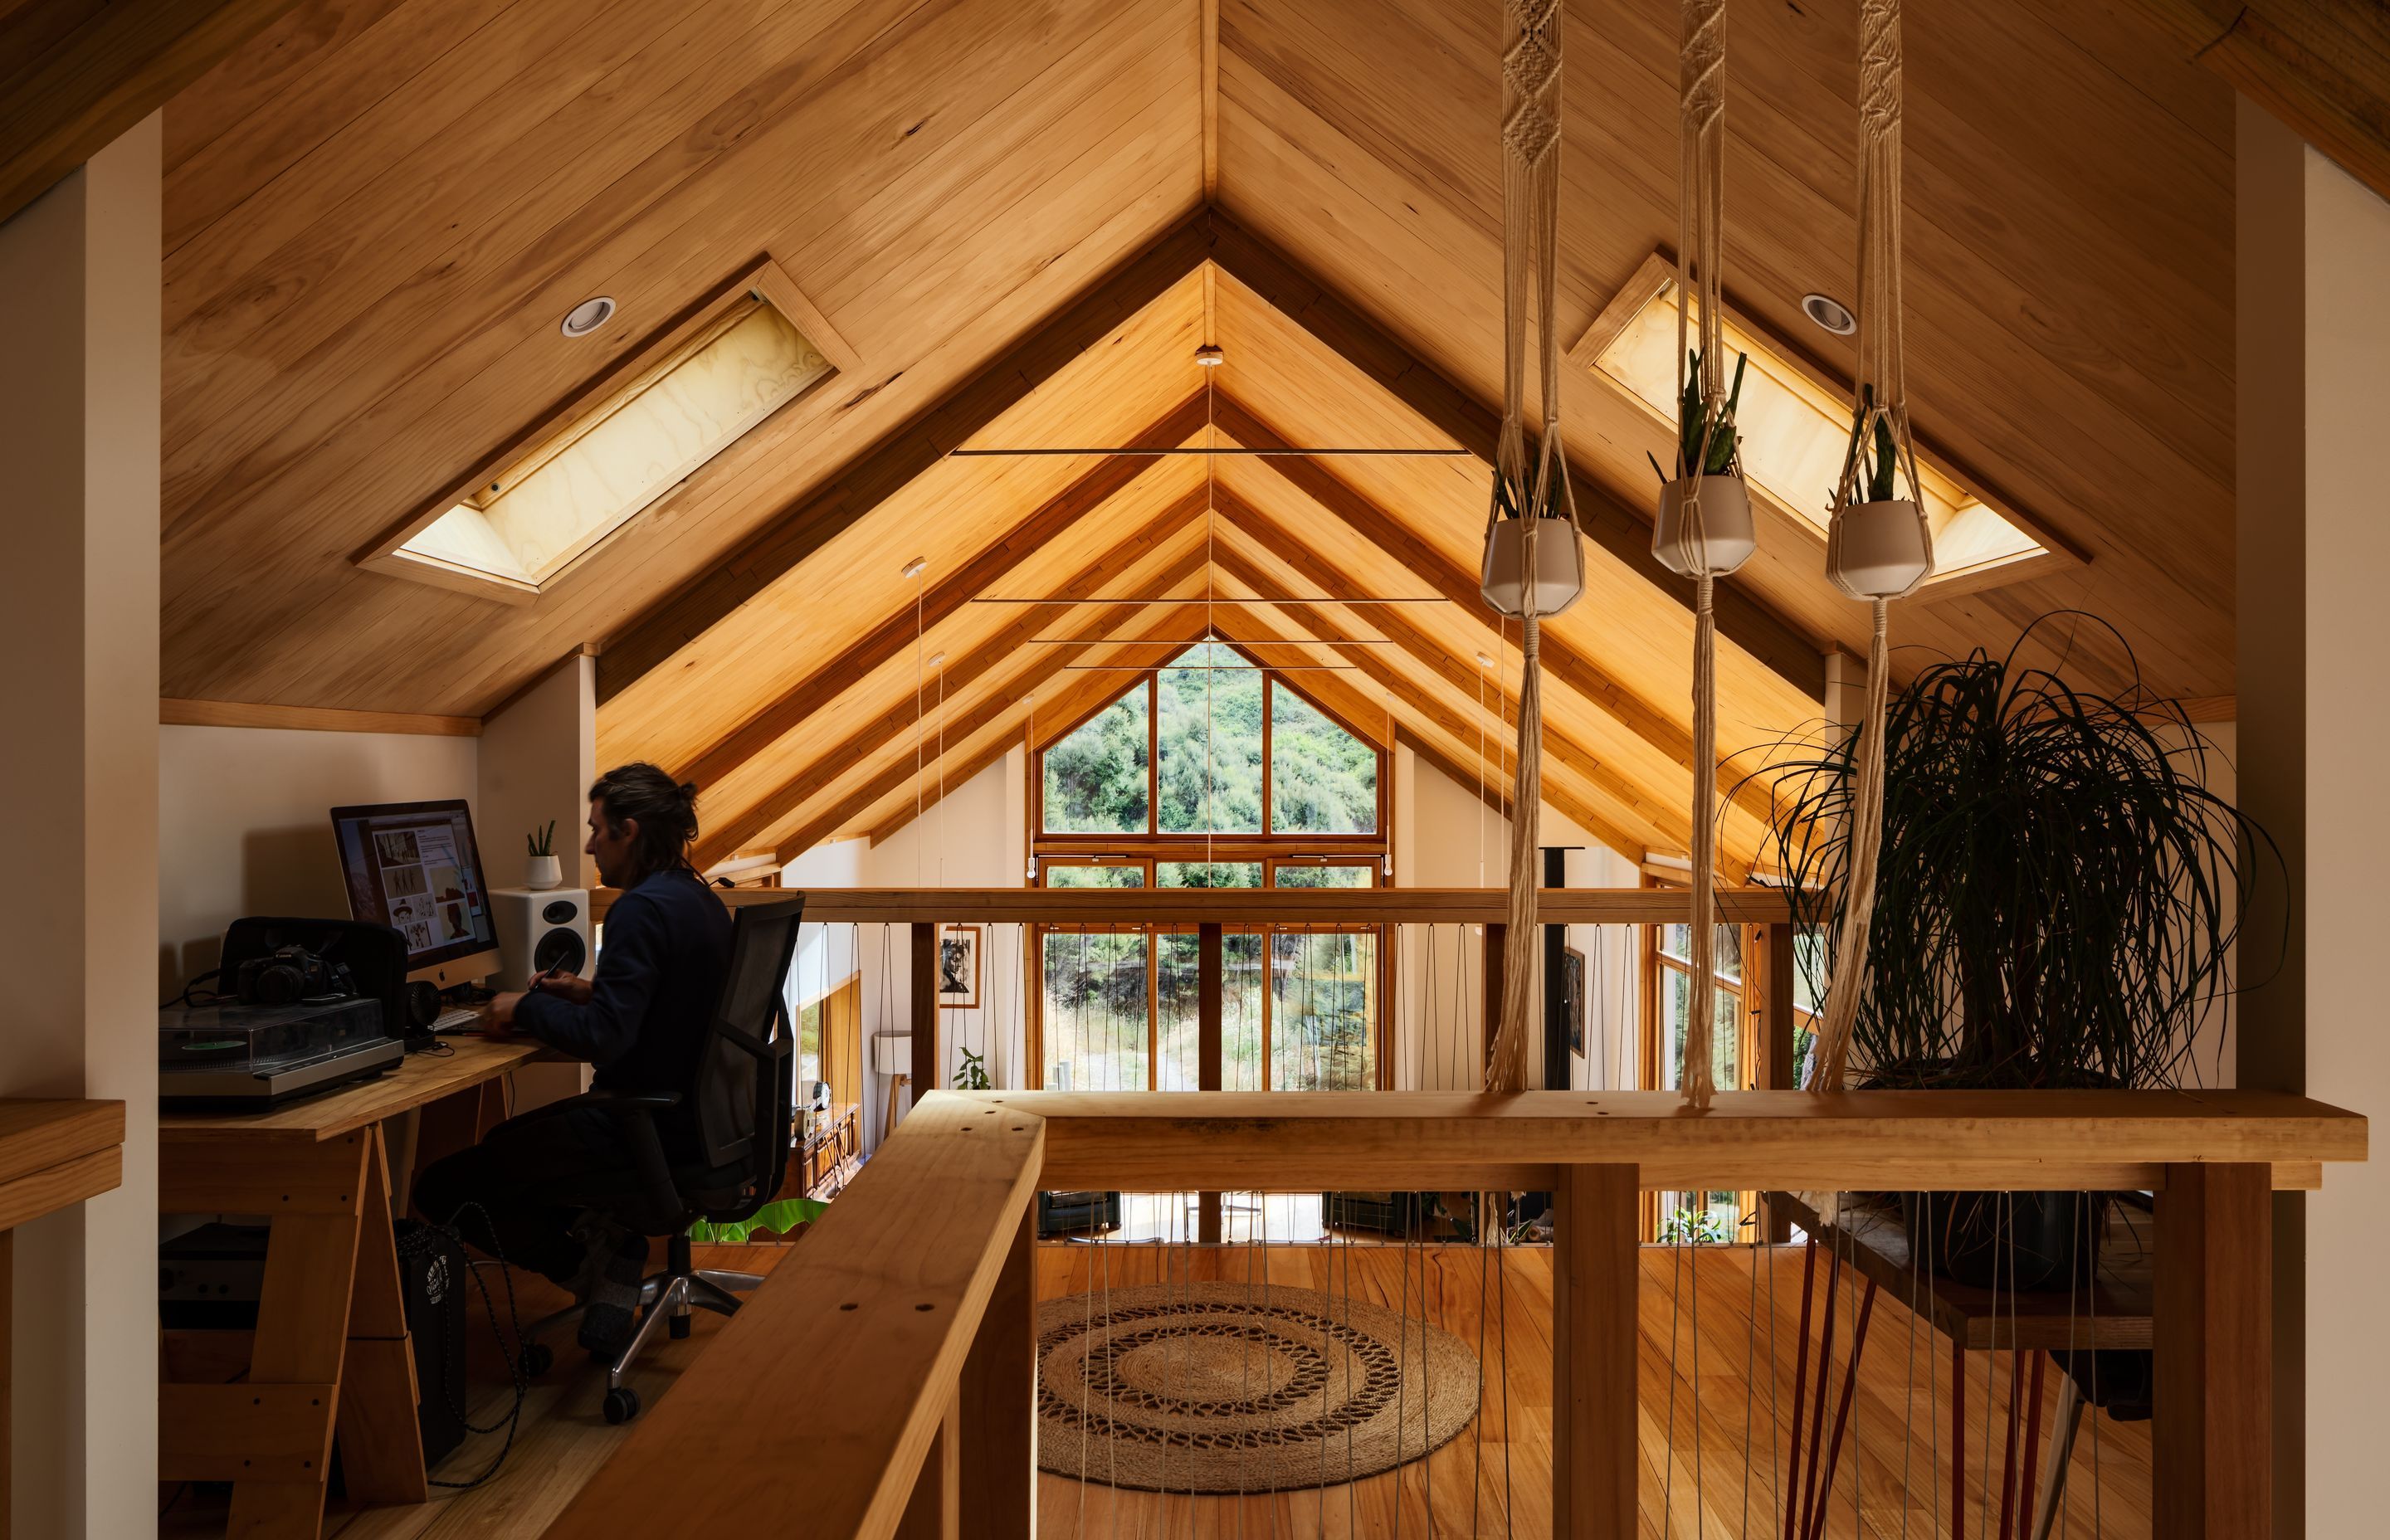 The mezzanine space is designed for study and play, drawing in light through openable skylights and the full-height gable window at the other end.